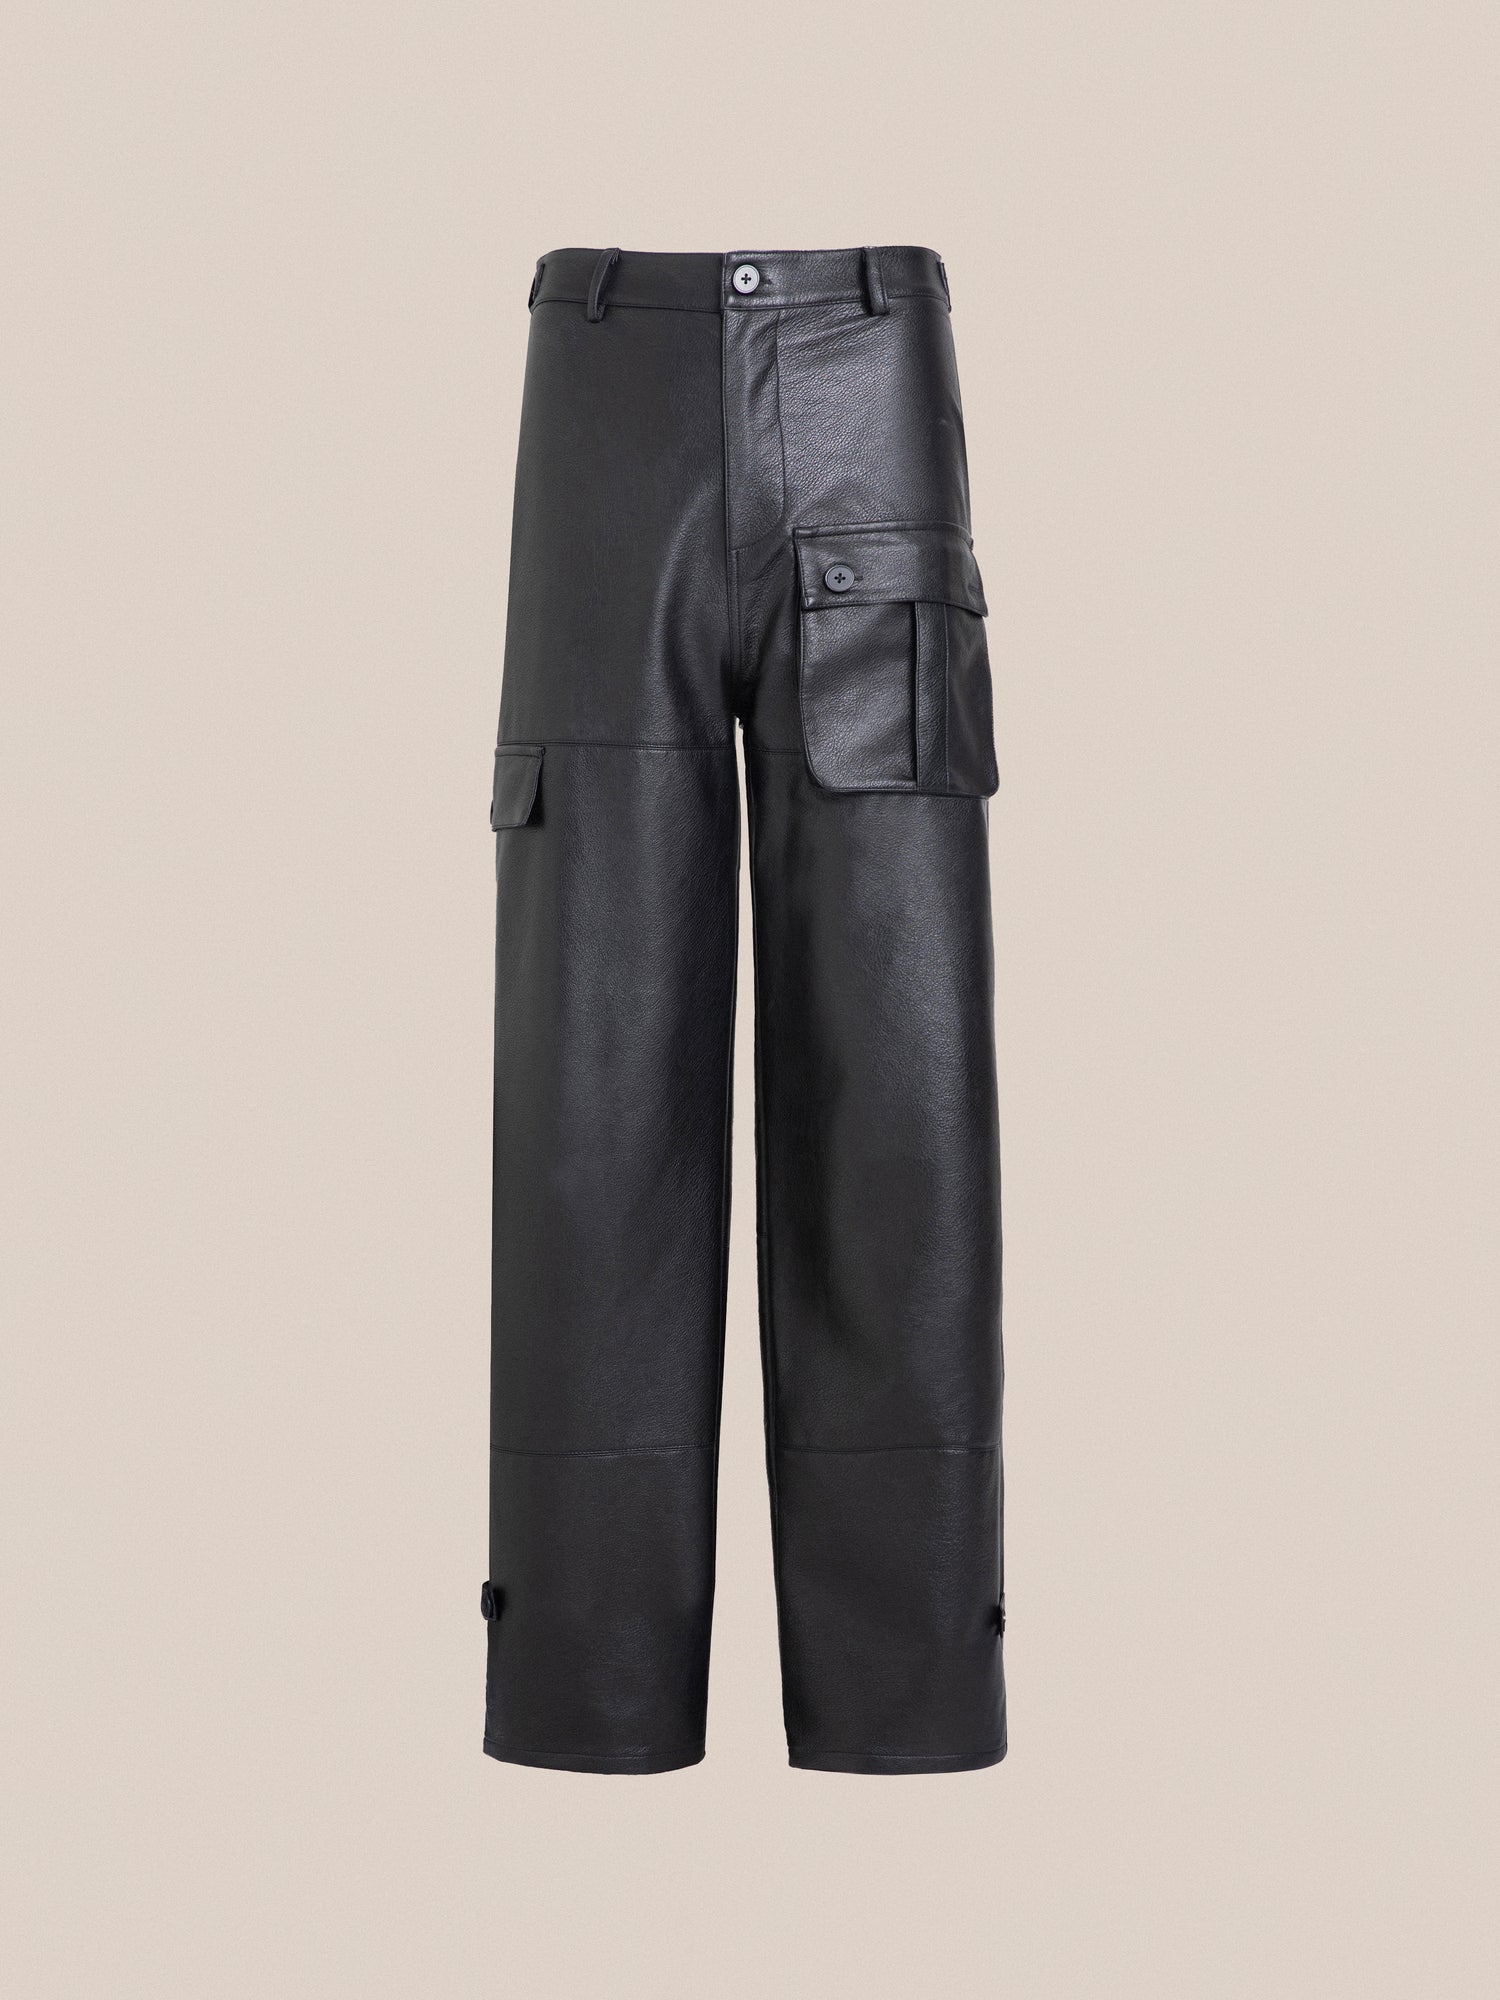 A pair of black Found Faux Leather Cargo Pants with cargo pockets.